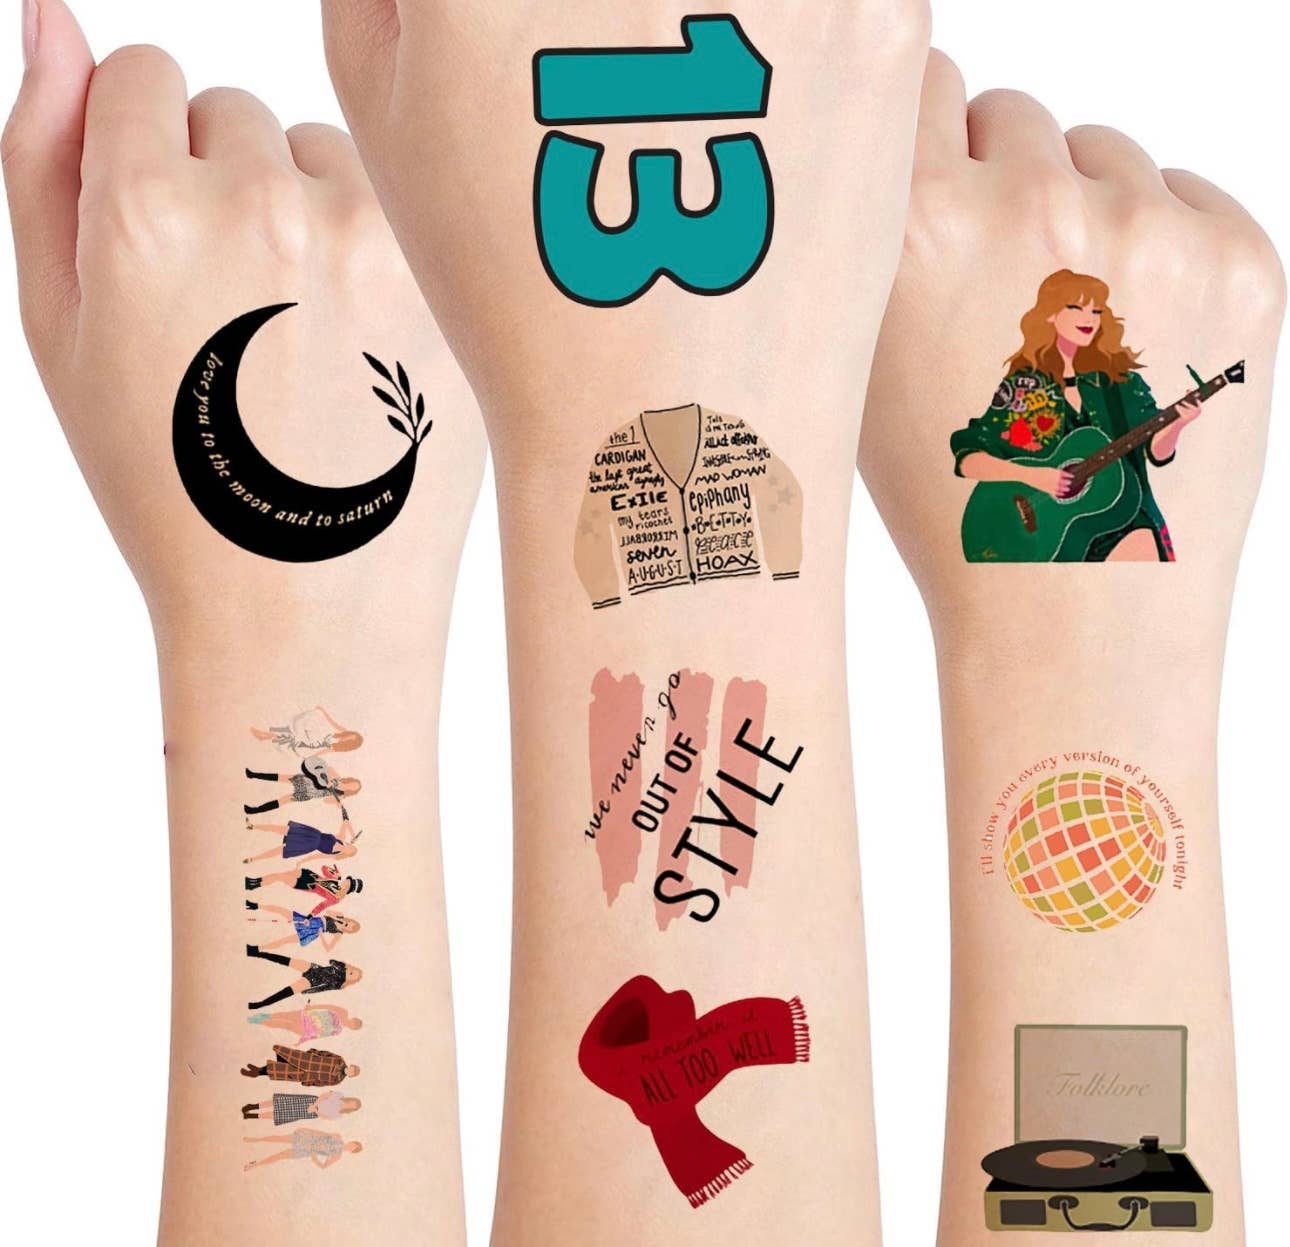 Taylor Swift tattoos pack of 20